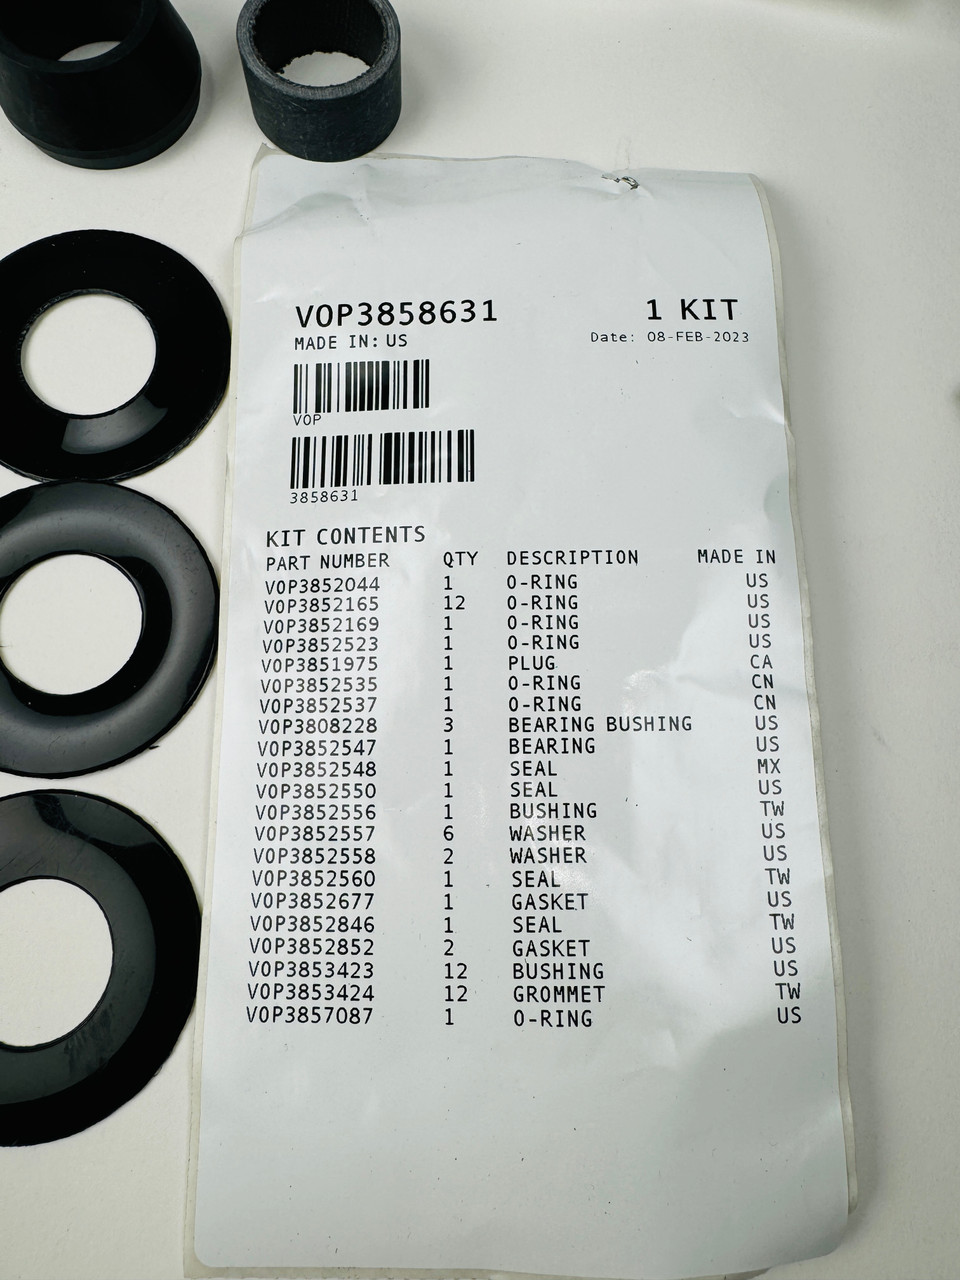 $179.99* GENUINE VOLVO no tax*  TRANSOM SEALING KIT 3858631*In Stock & Ready To Ship!